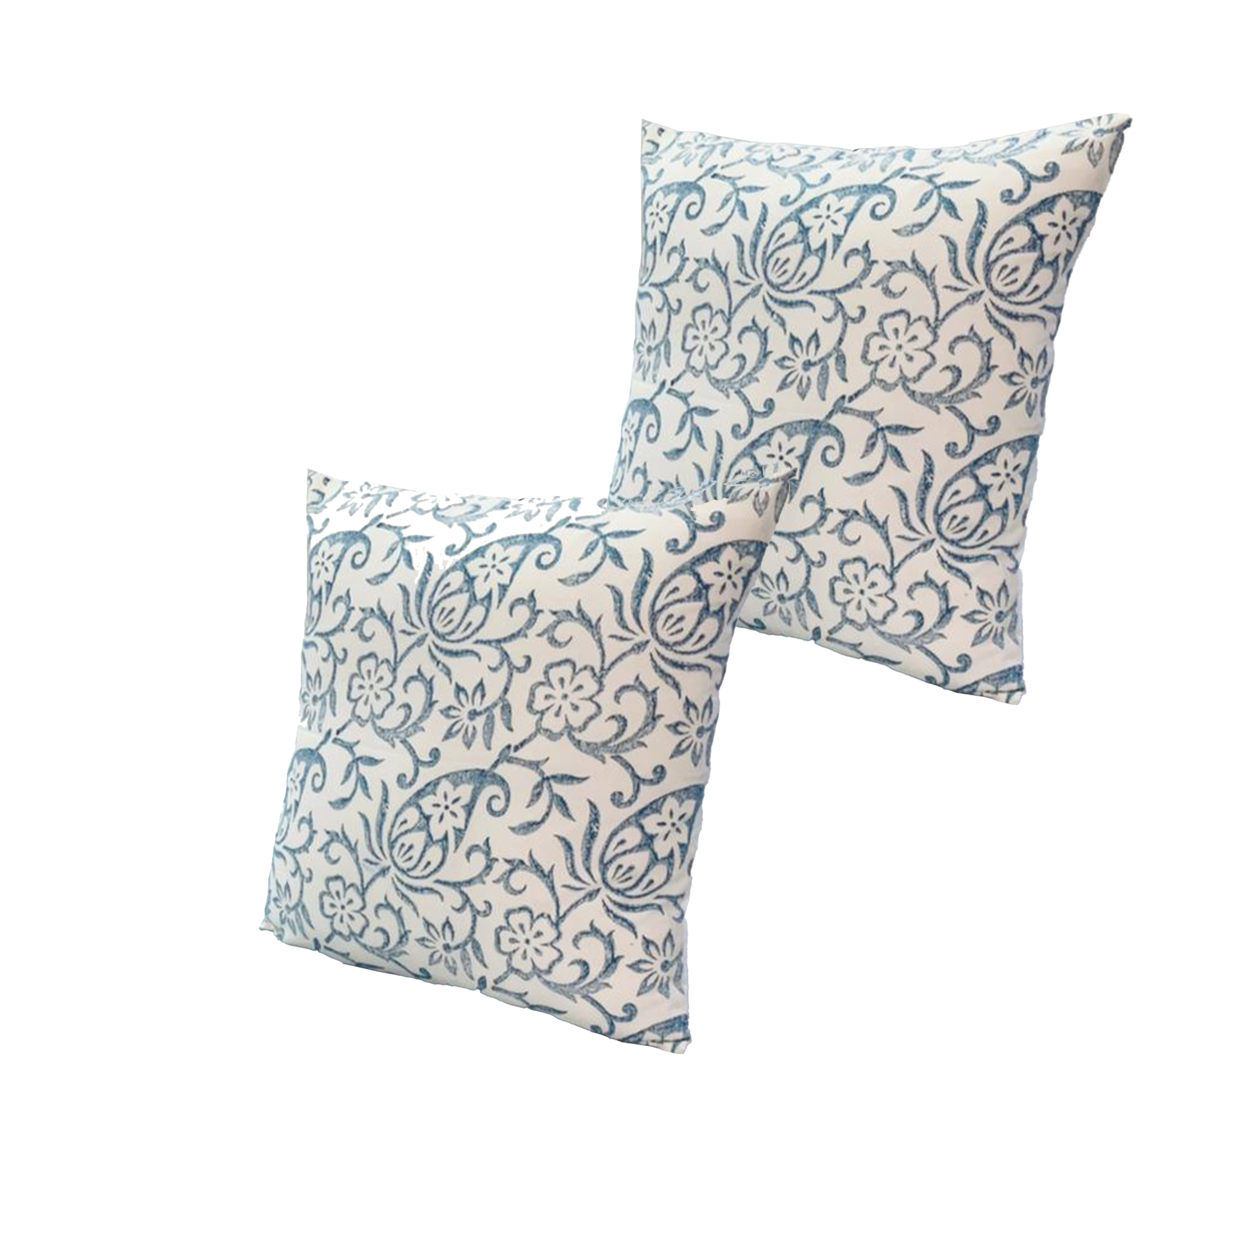 18 X 18 Square Accent Pillows, Paisley Floral Pattern, Cotton Cover, Set Of 2, Blue, White